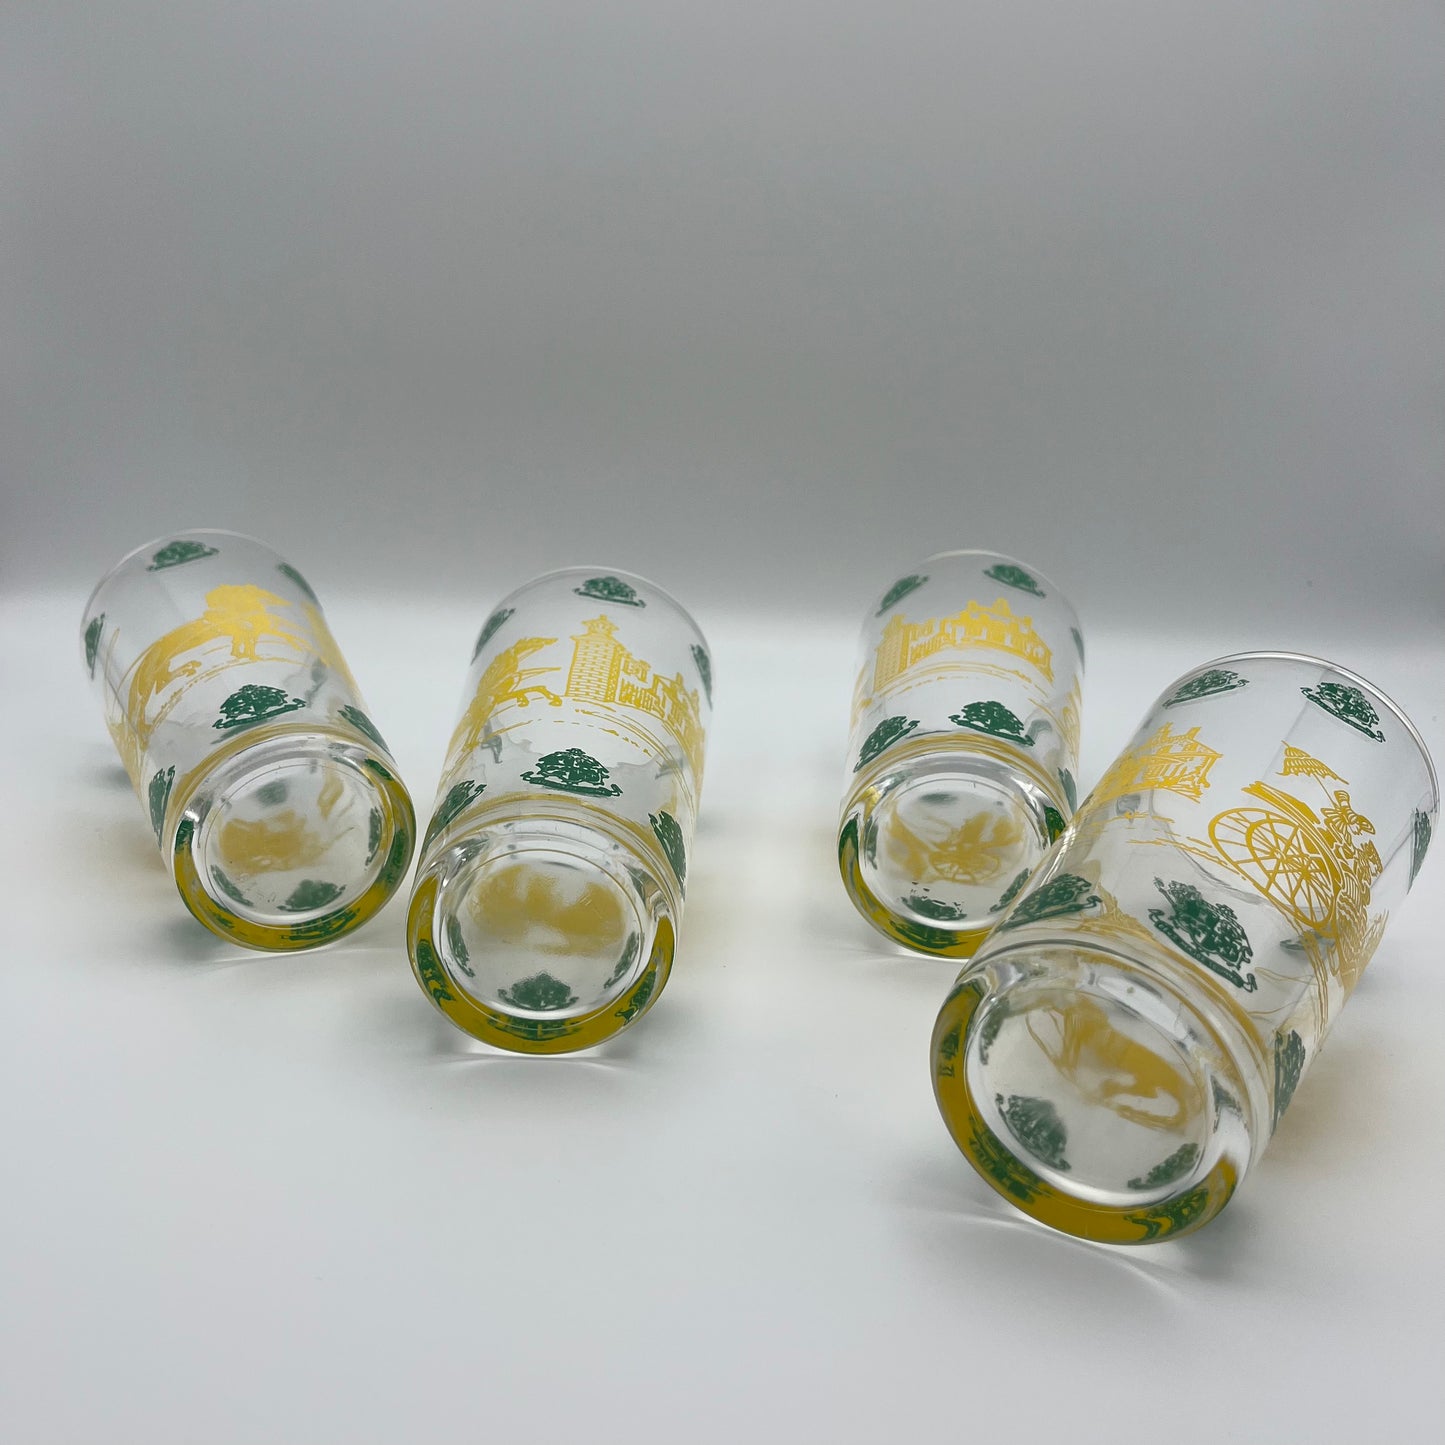 Late 50s/ Late 60s Williamsburg Carriage Glasses (Set of 4)